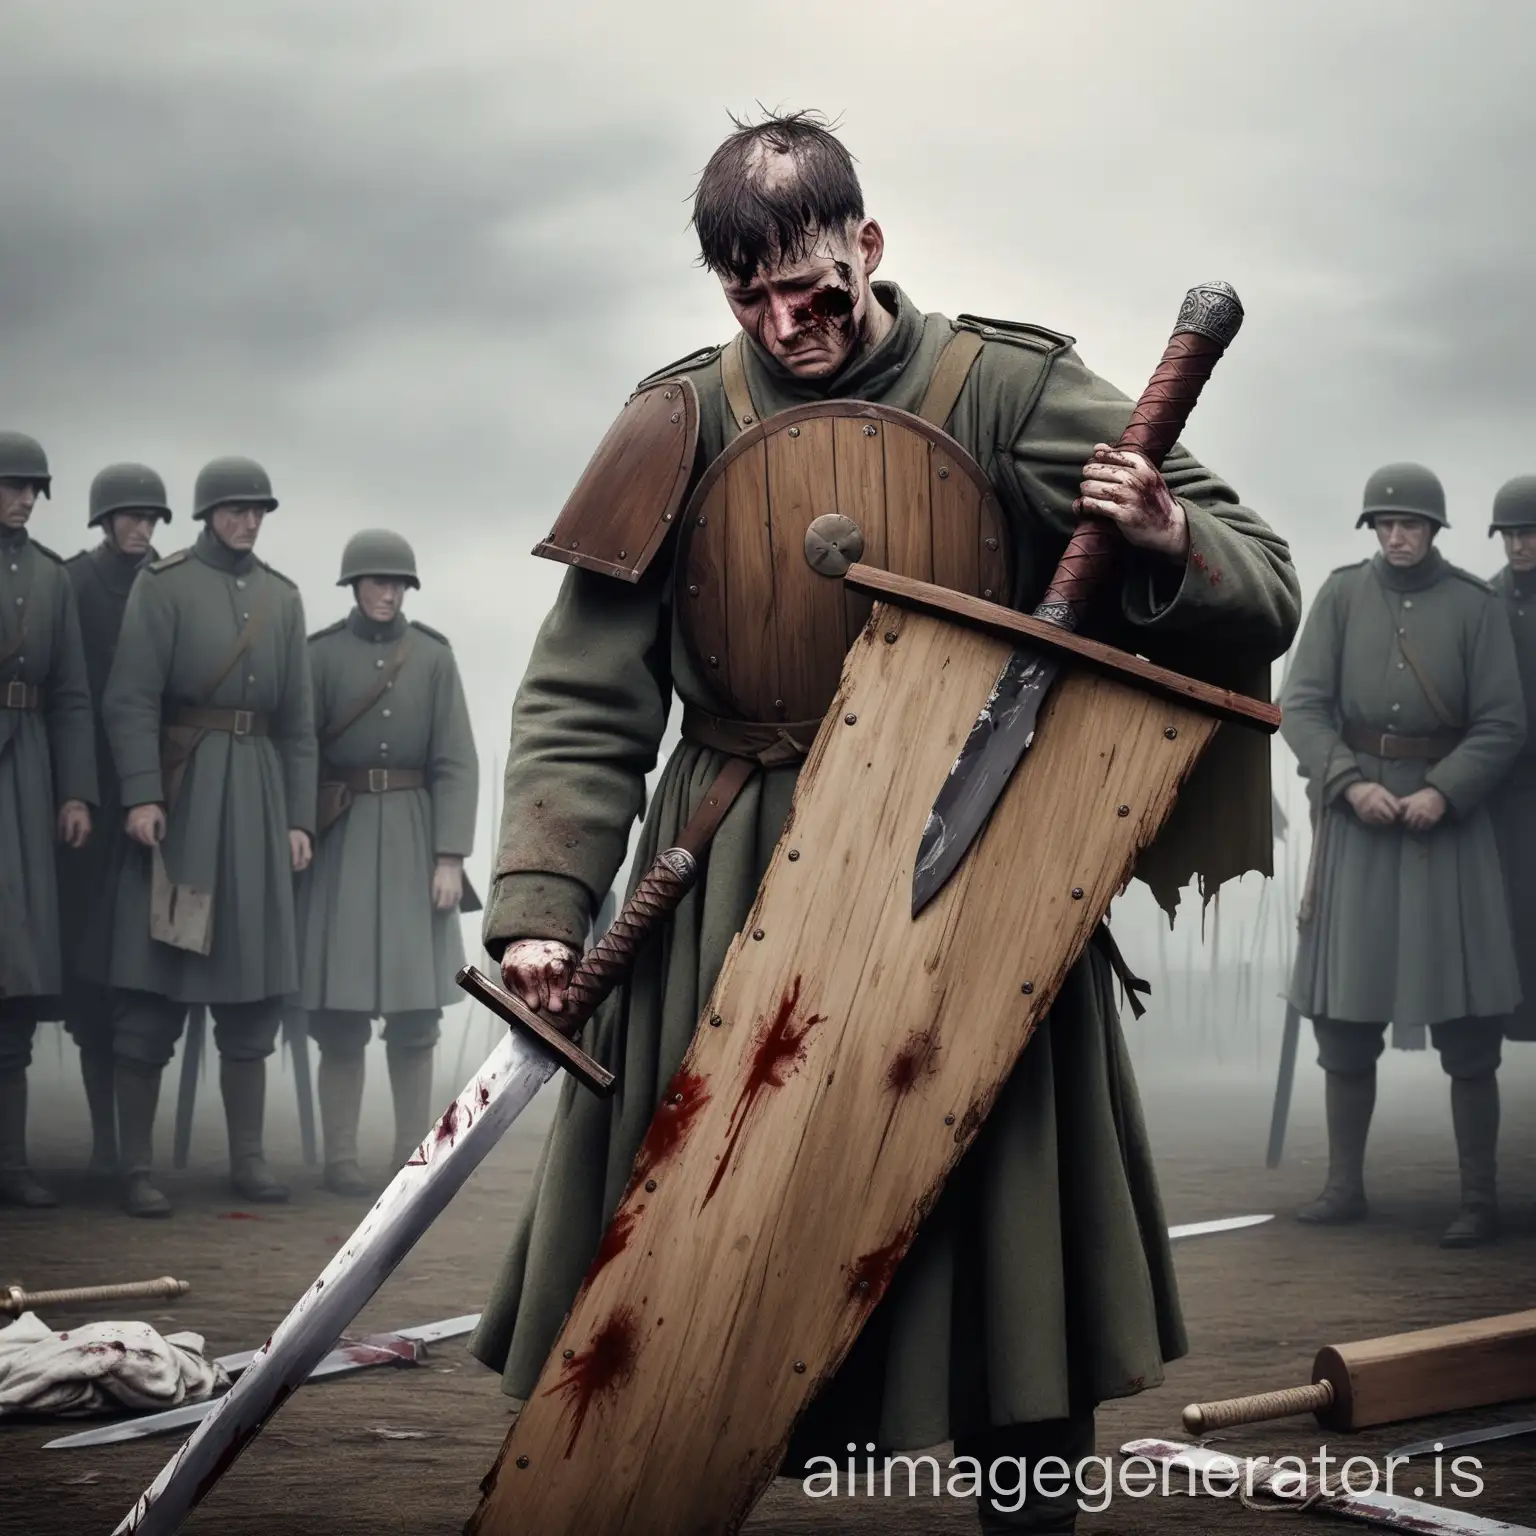 A sad wounded soldier with old wooden sword and wooden shield